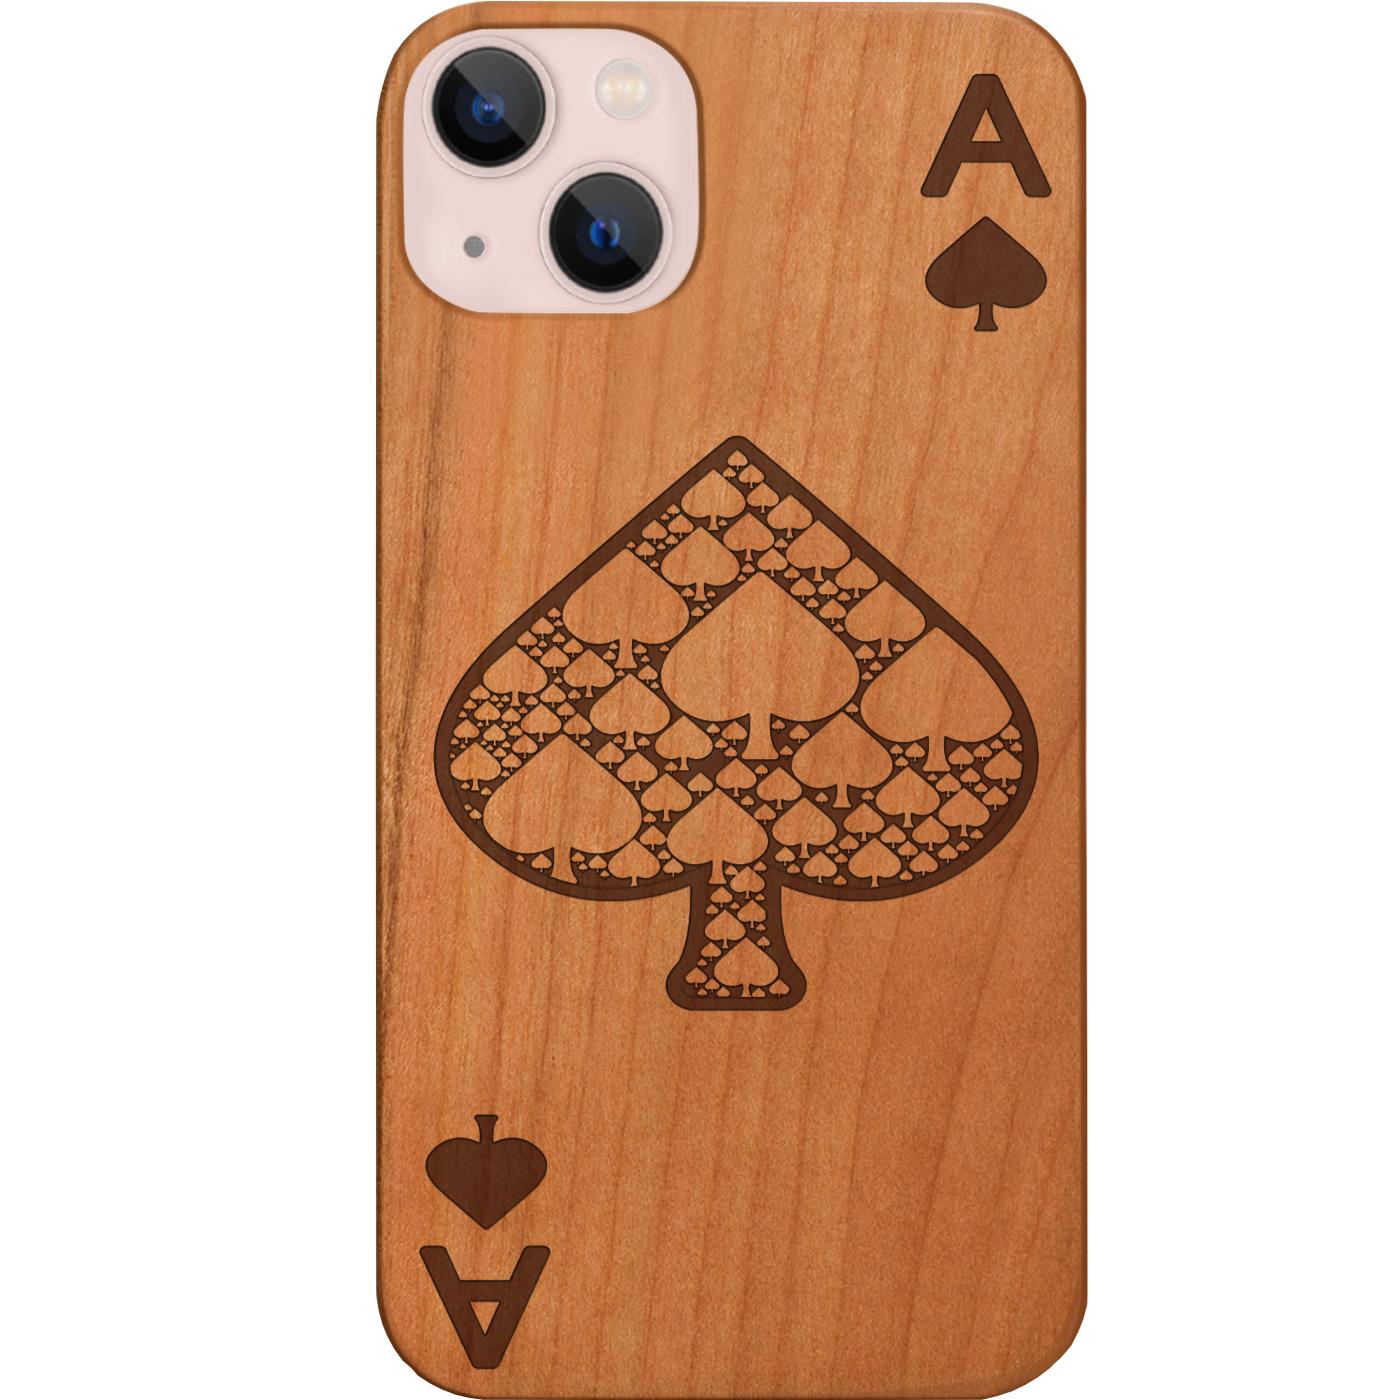 Ace of Spades - Engraved Phone Case